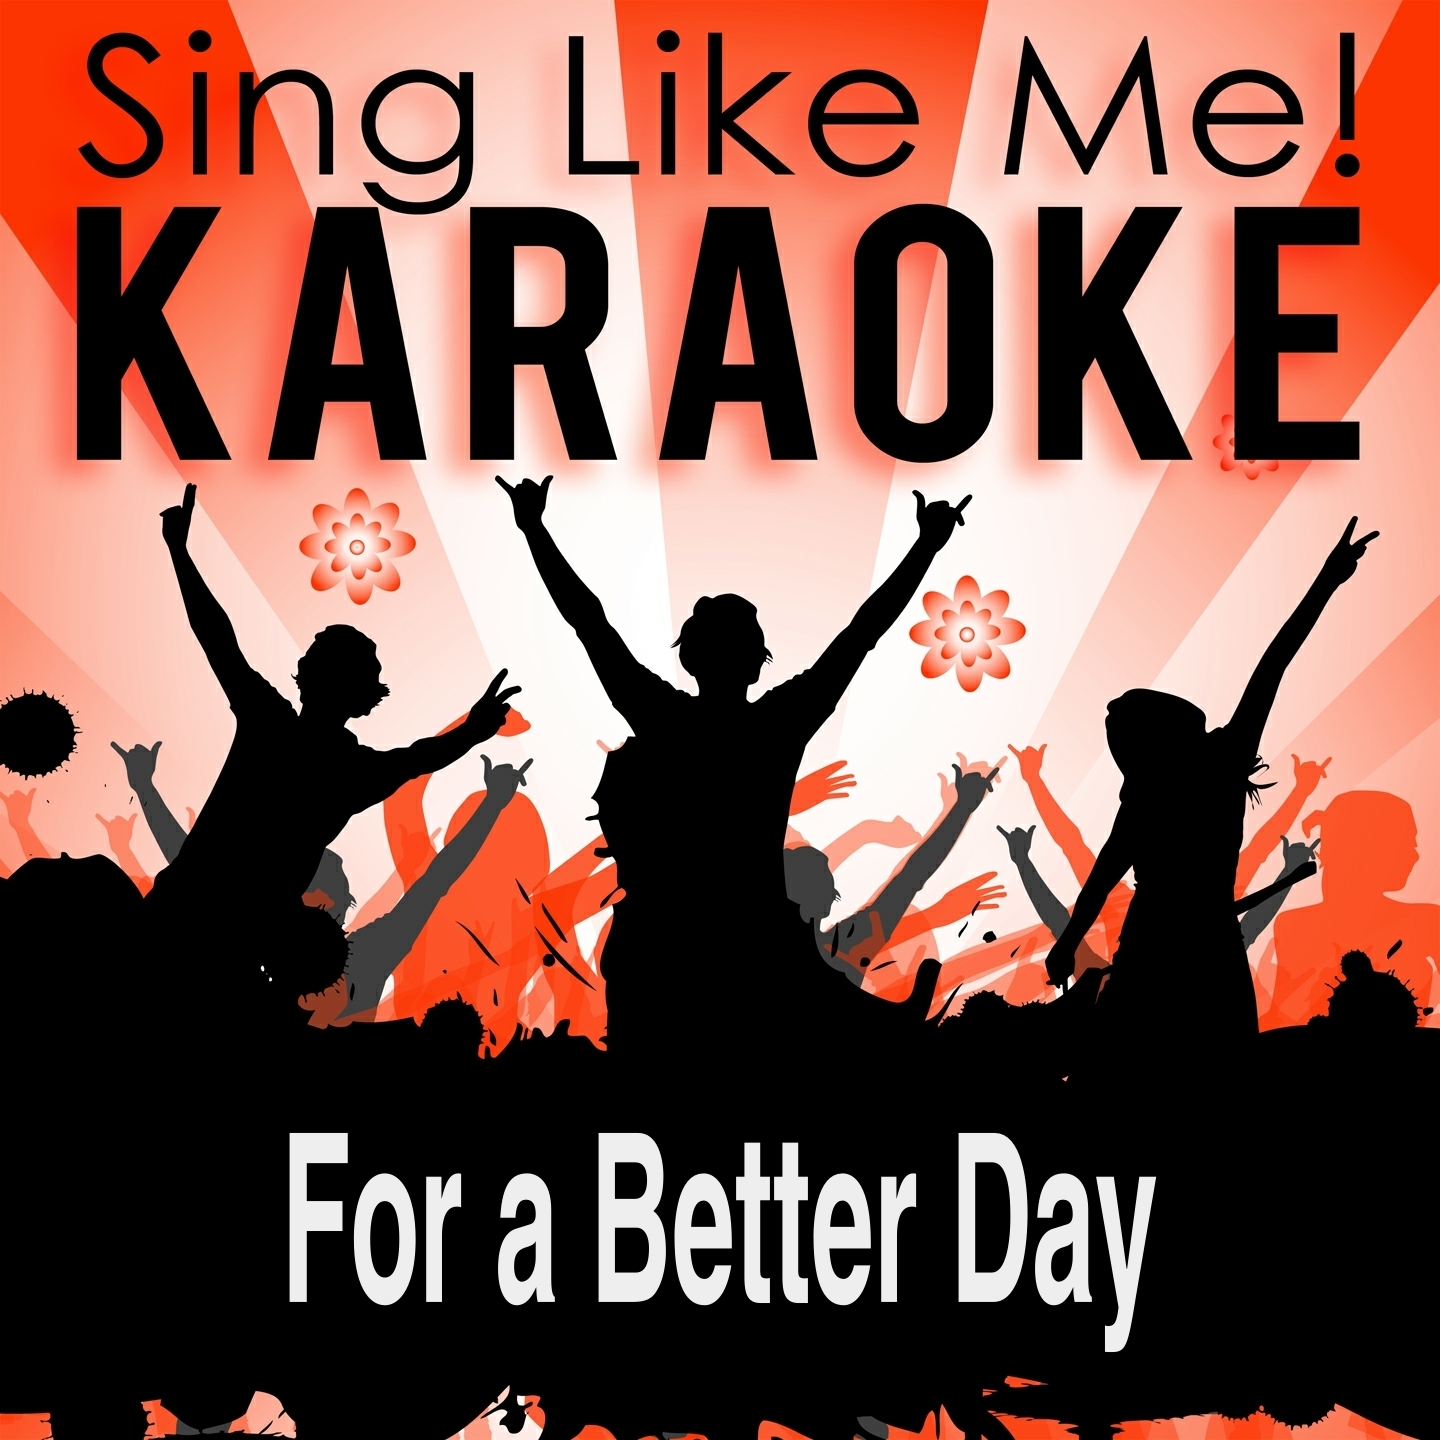 For a Better Day (Karaoke Version with Guide Melody) (Originally Performed By Avicii)